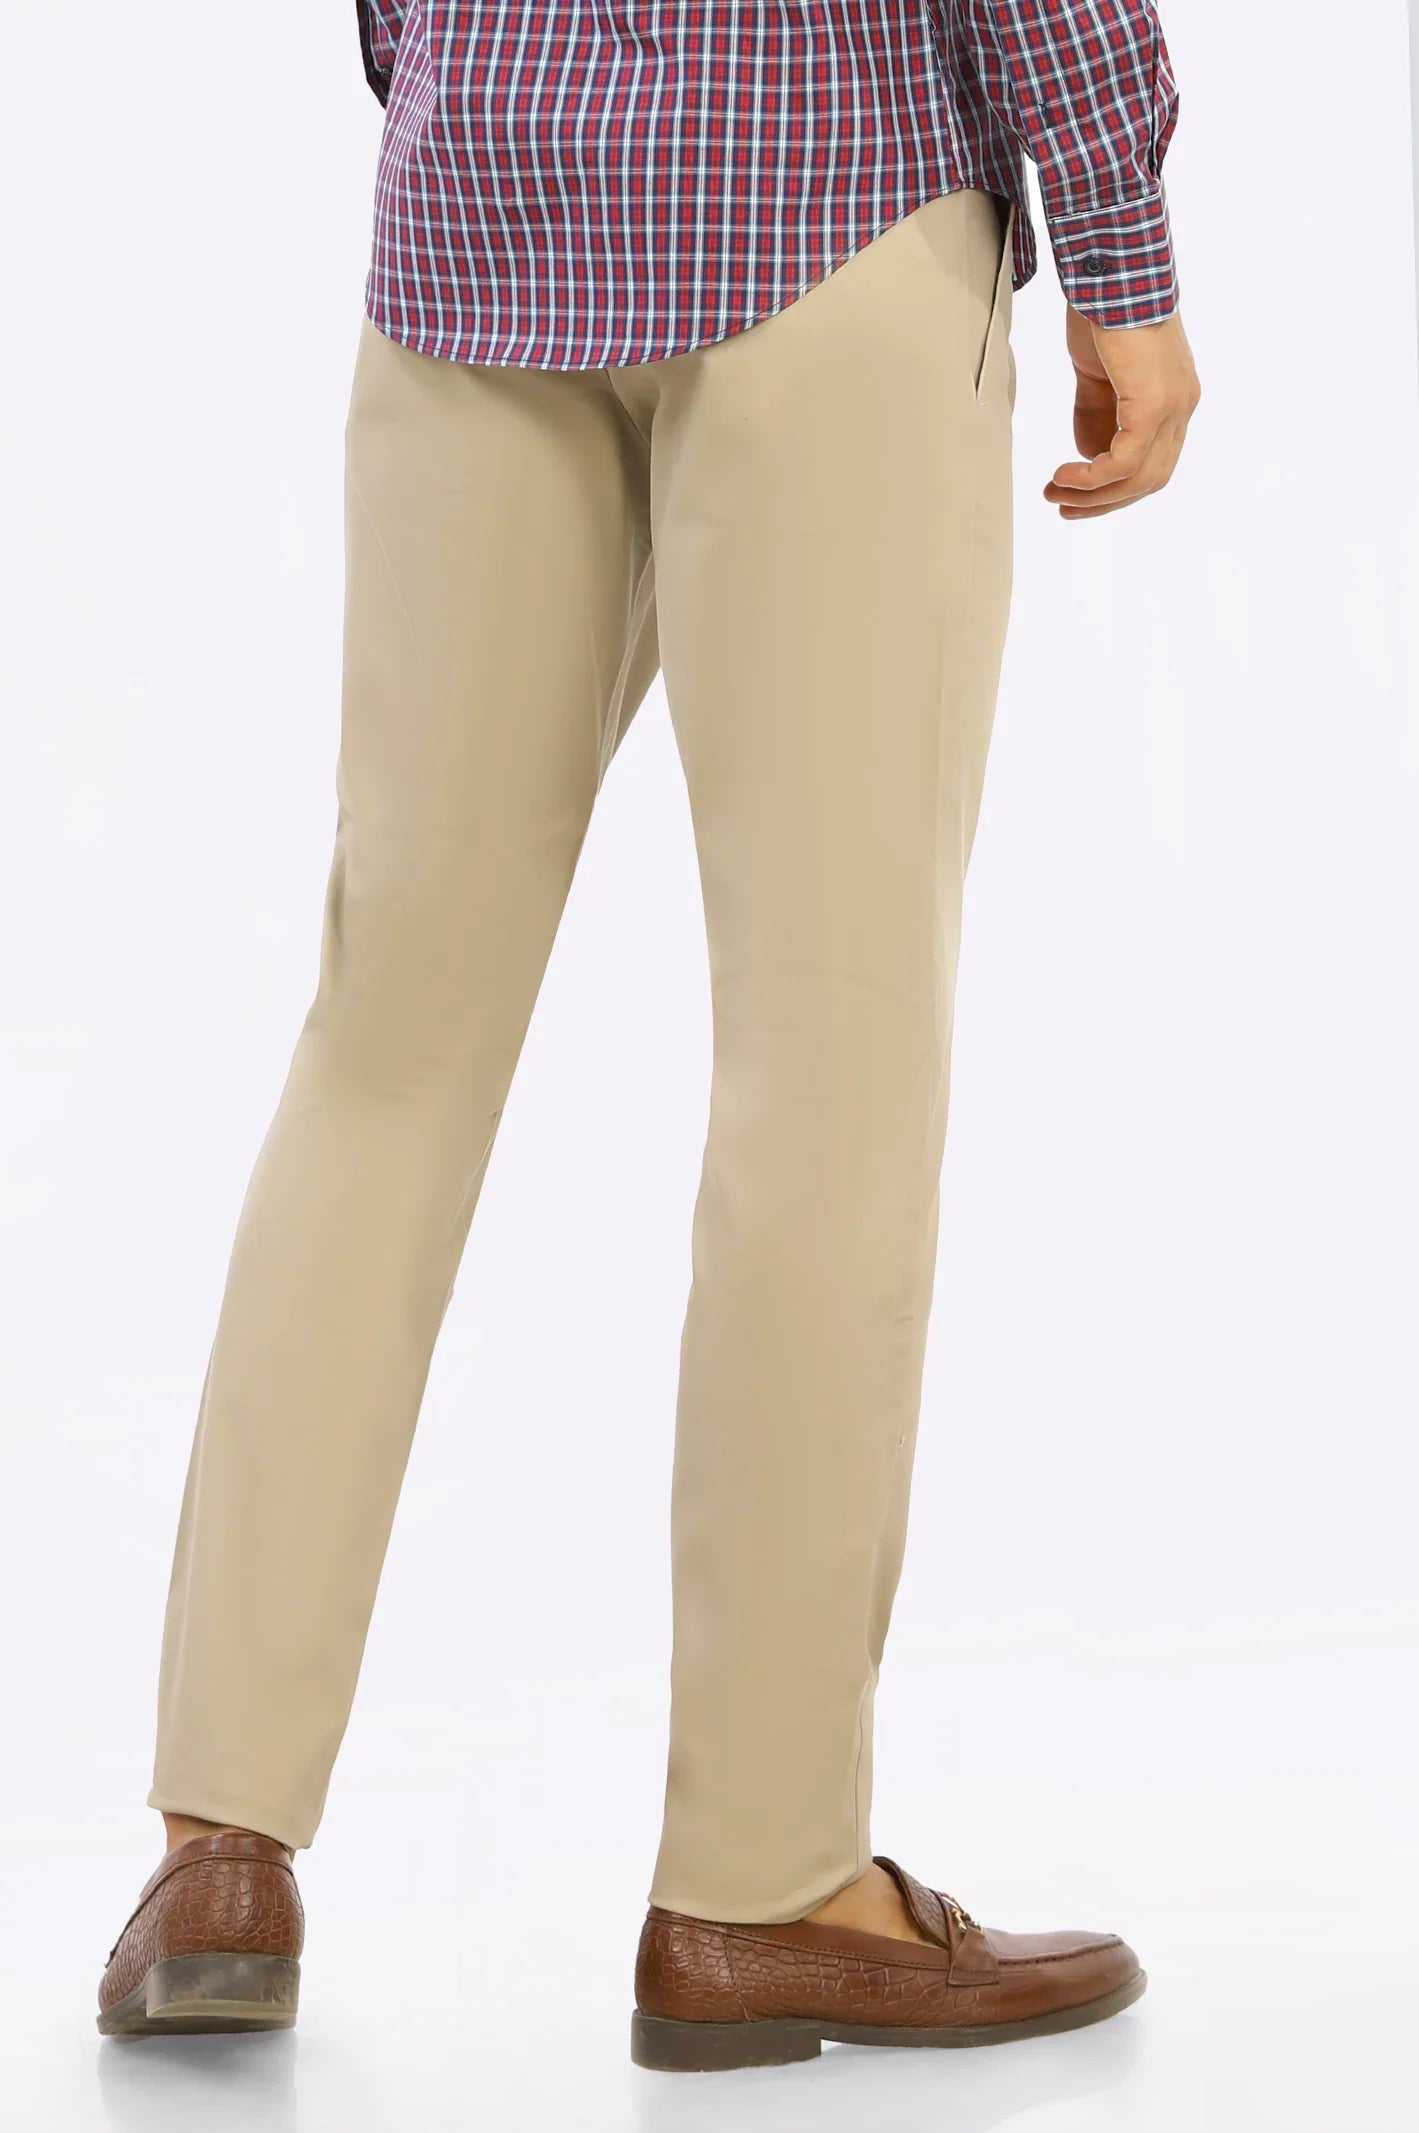 Khaki Smart Fit Cotton Chino From Diners